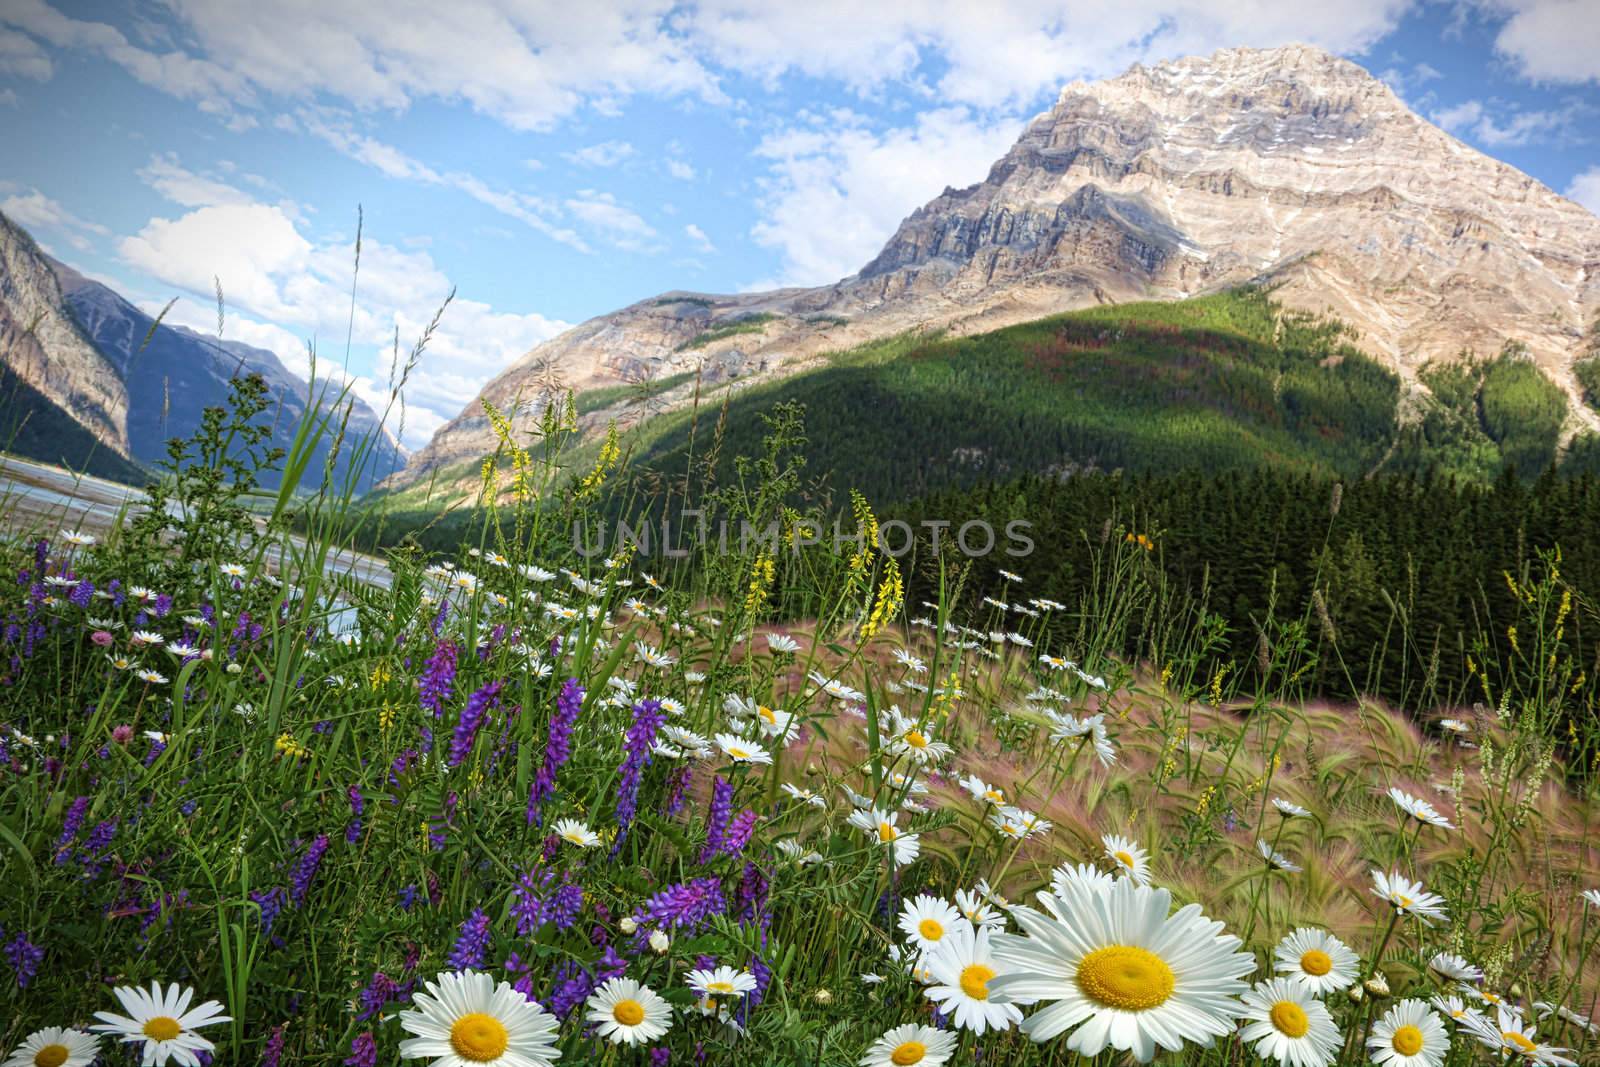 Field of daisies and wild flowers by Sandralise